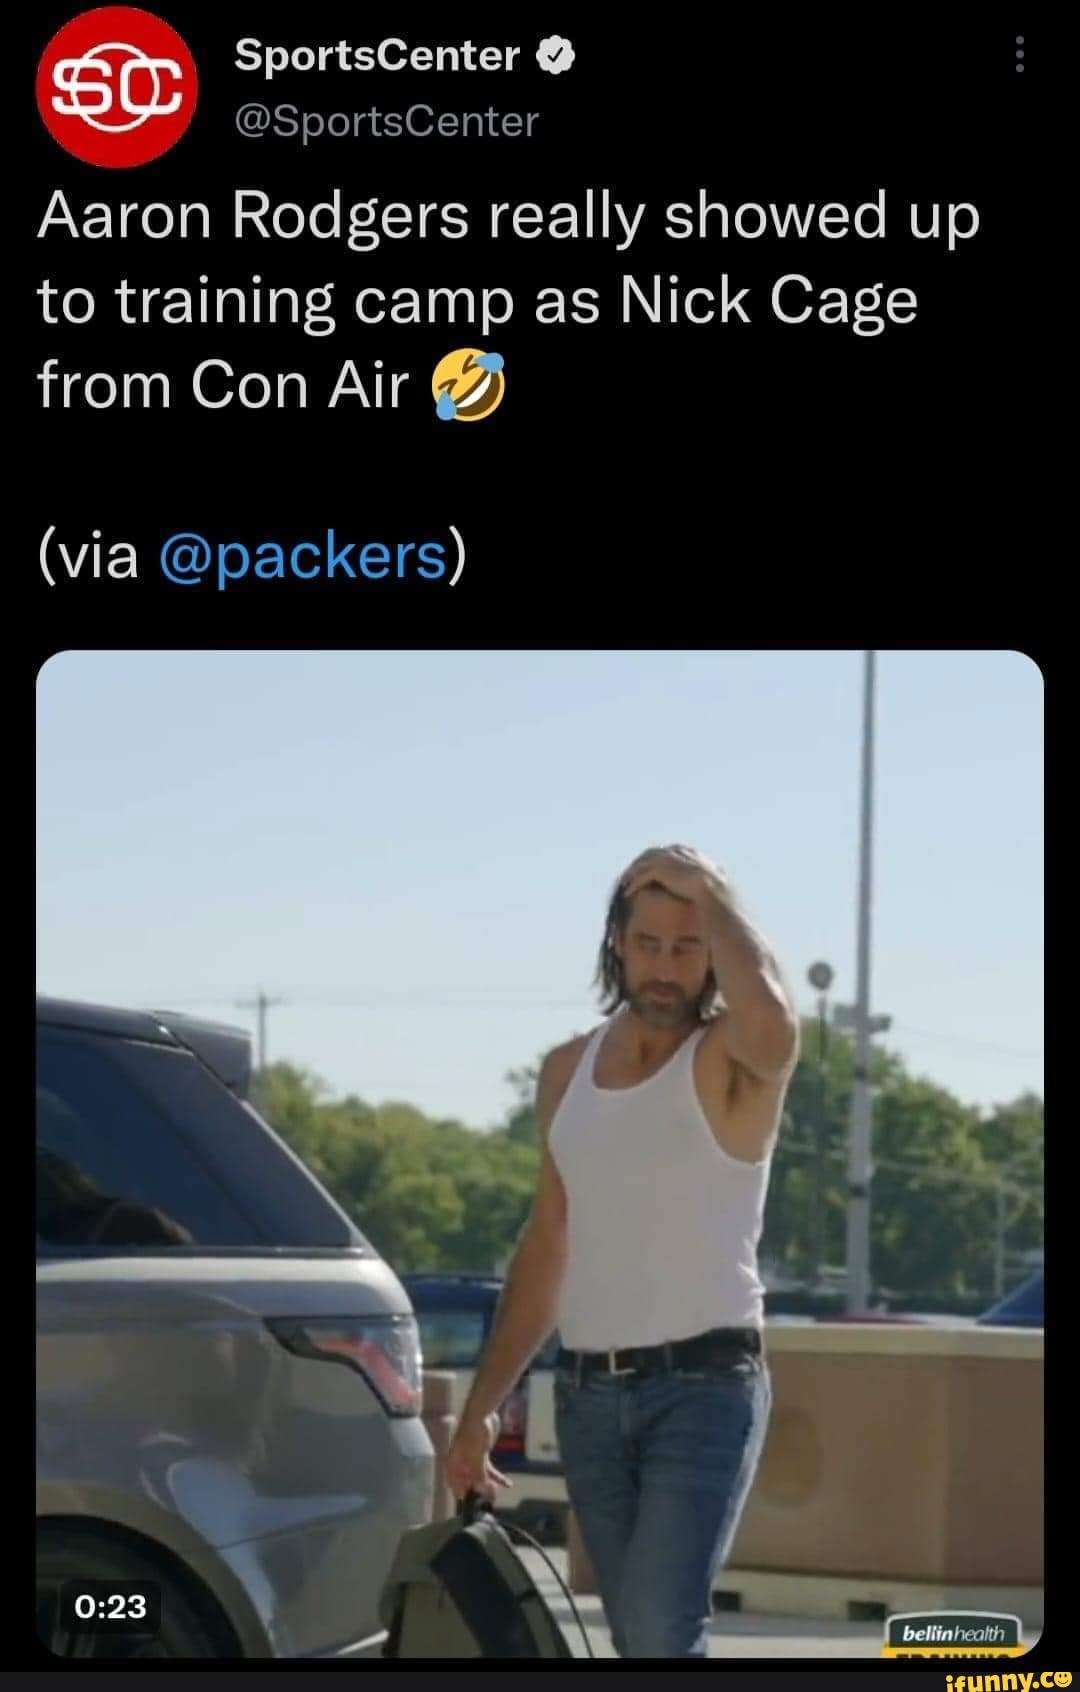 Aaron Rodgers channels Nicolas Cage as he arrives at Packers training camp